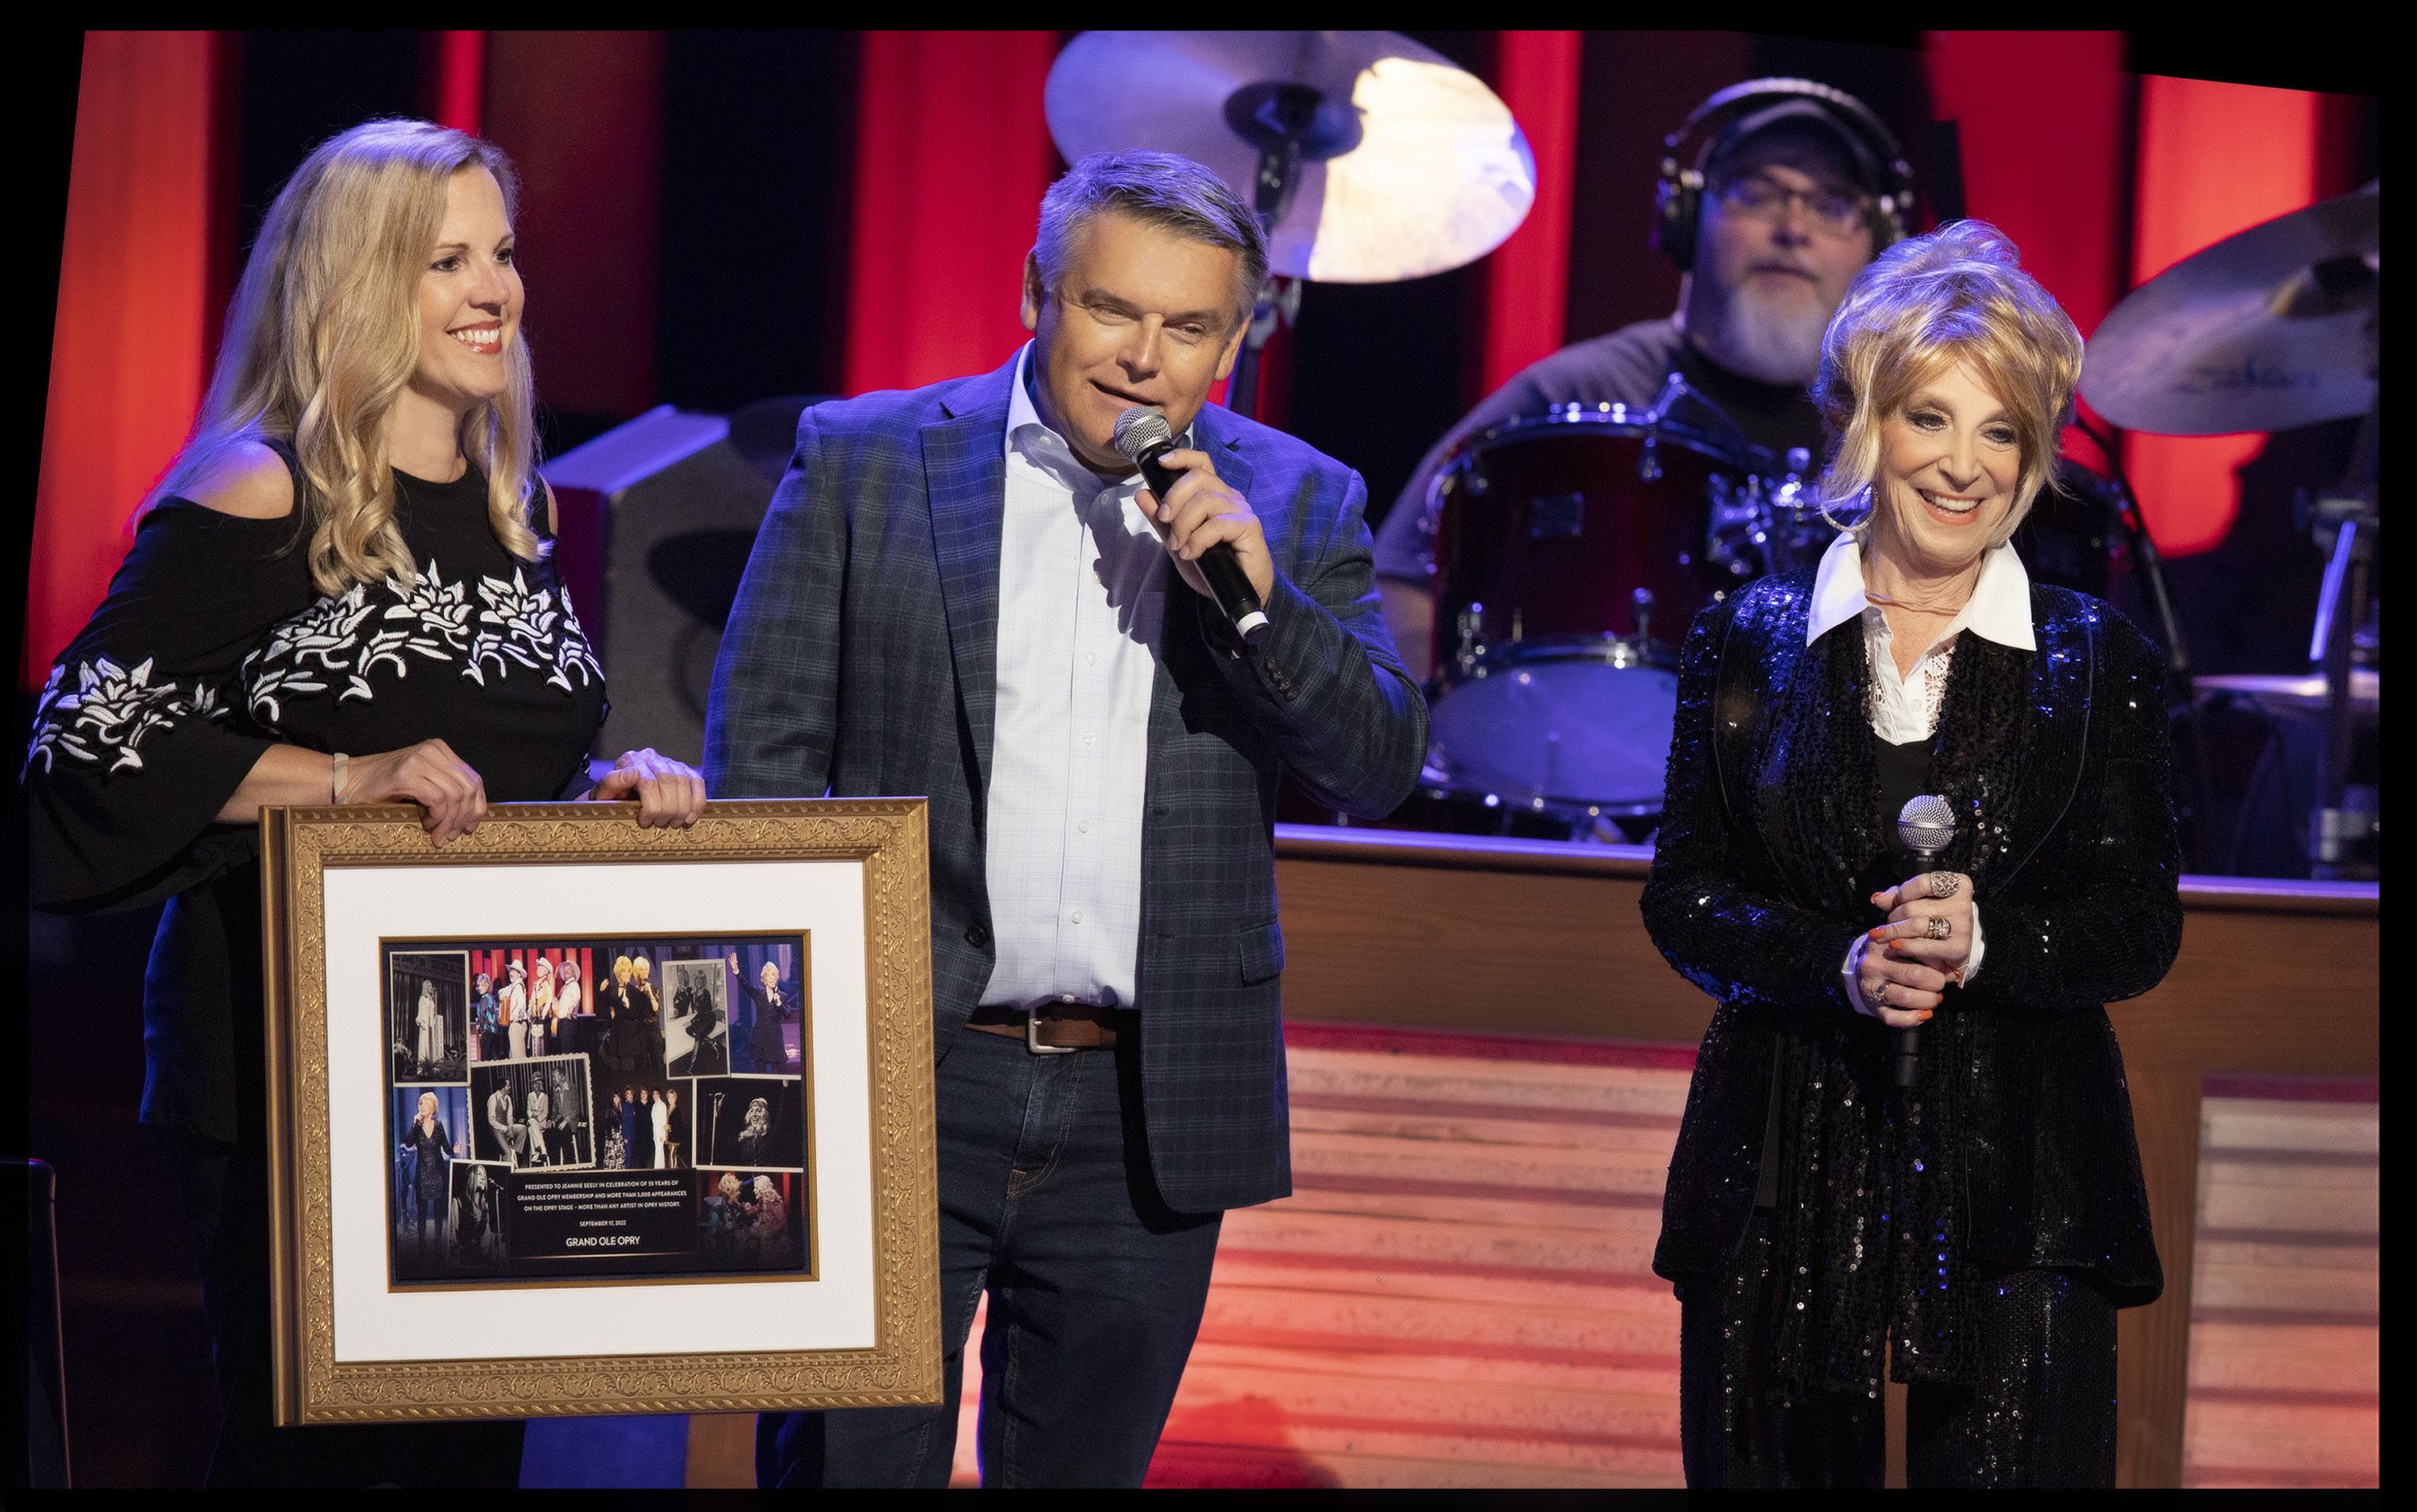 Grammy Winning Artist, Jeannie Seely, Celebrates 55th Anniversary of Being a Member of the Grand Ole Opry